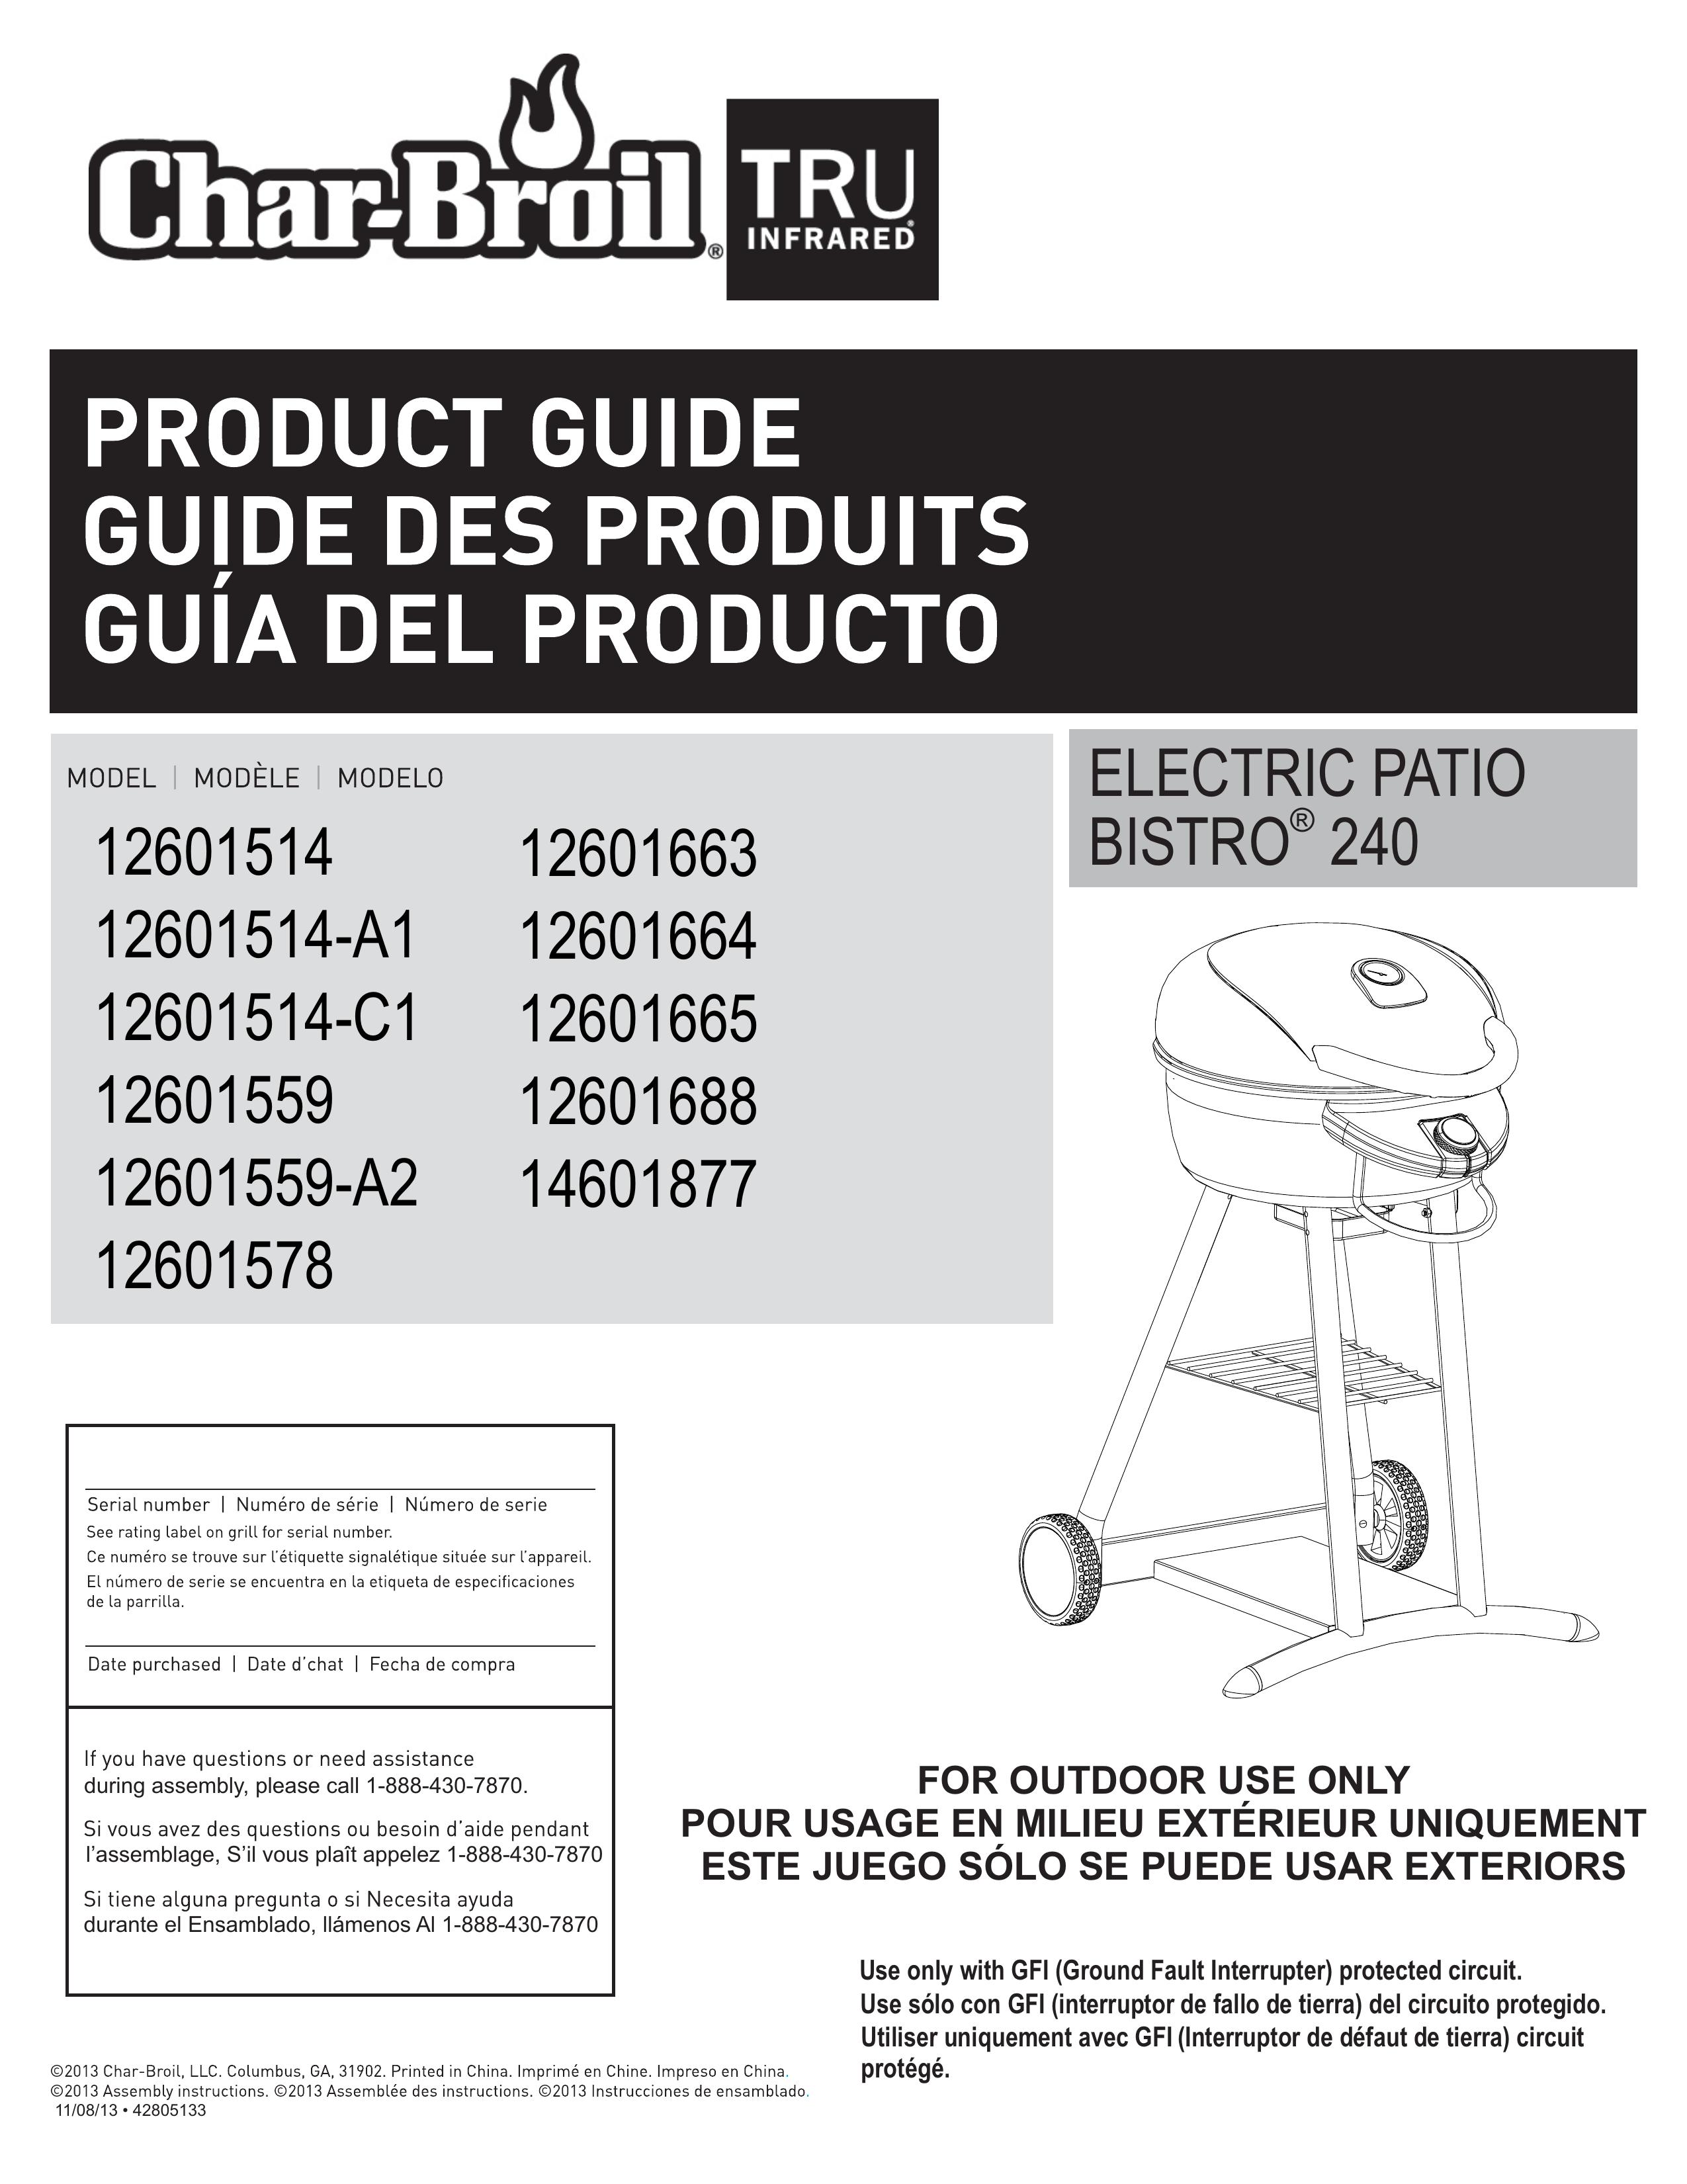 Char-Broil 14601877 Electric Grill User Manual